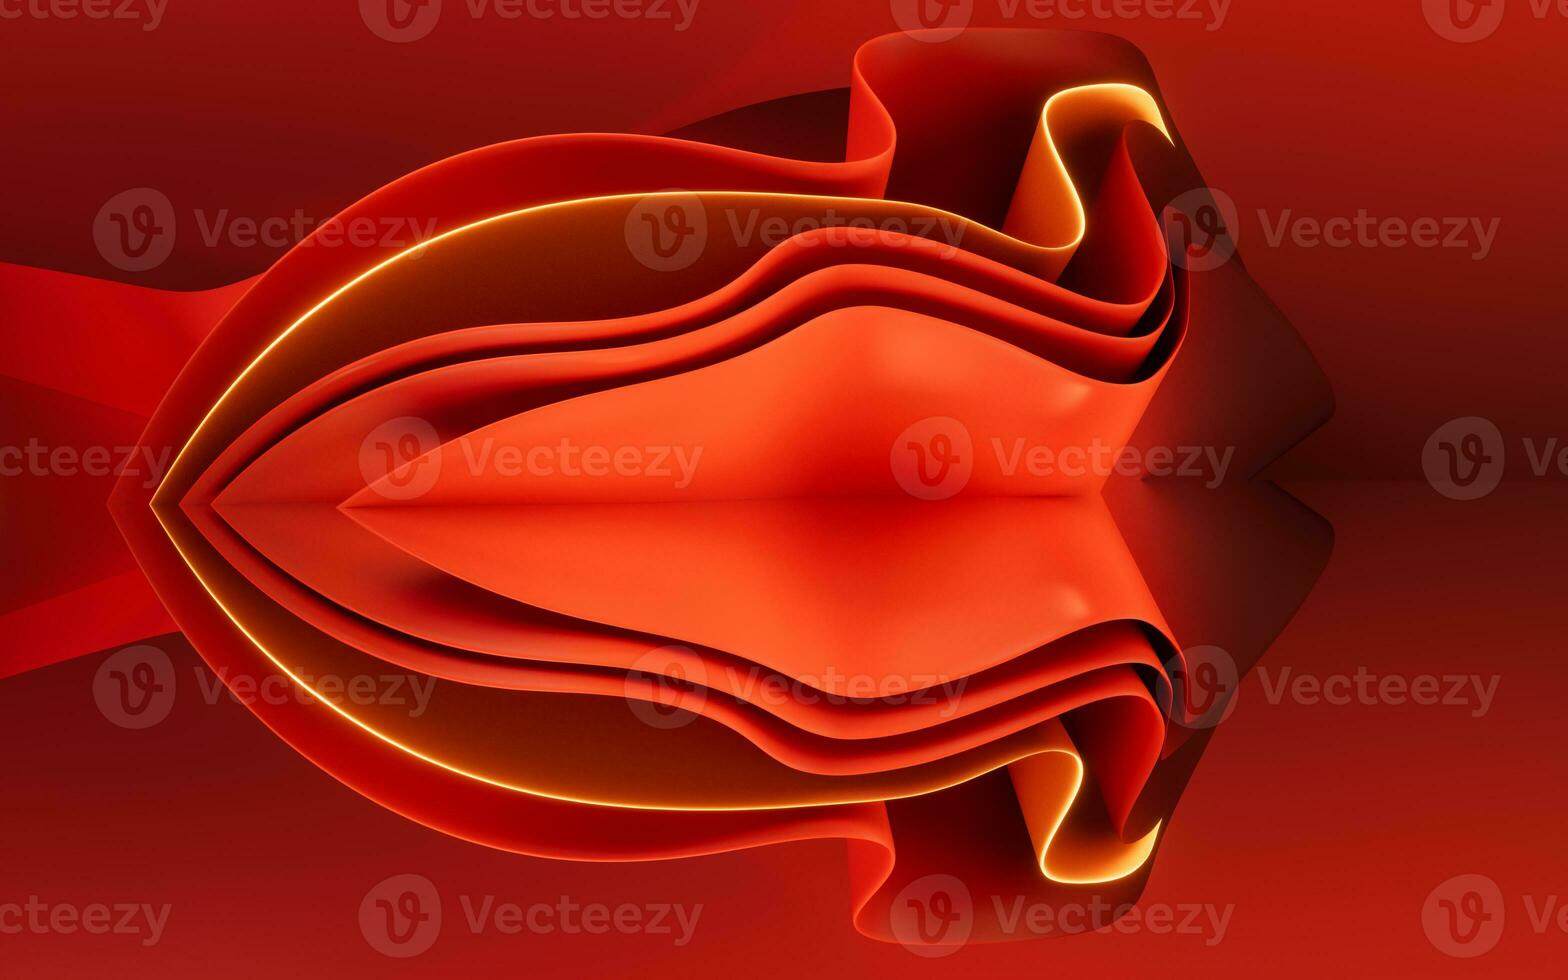 Abstract red curve geometry background, 3d rendering. photo